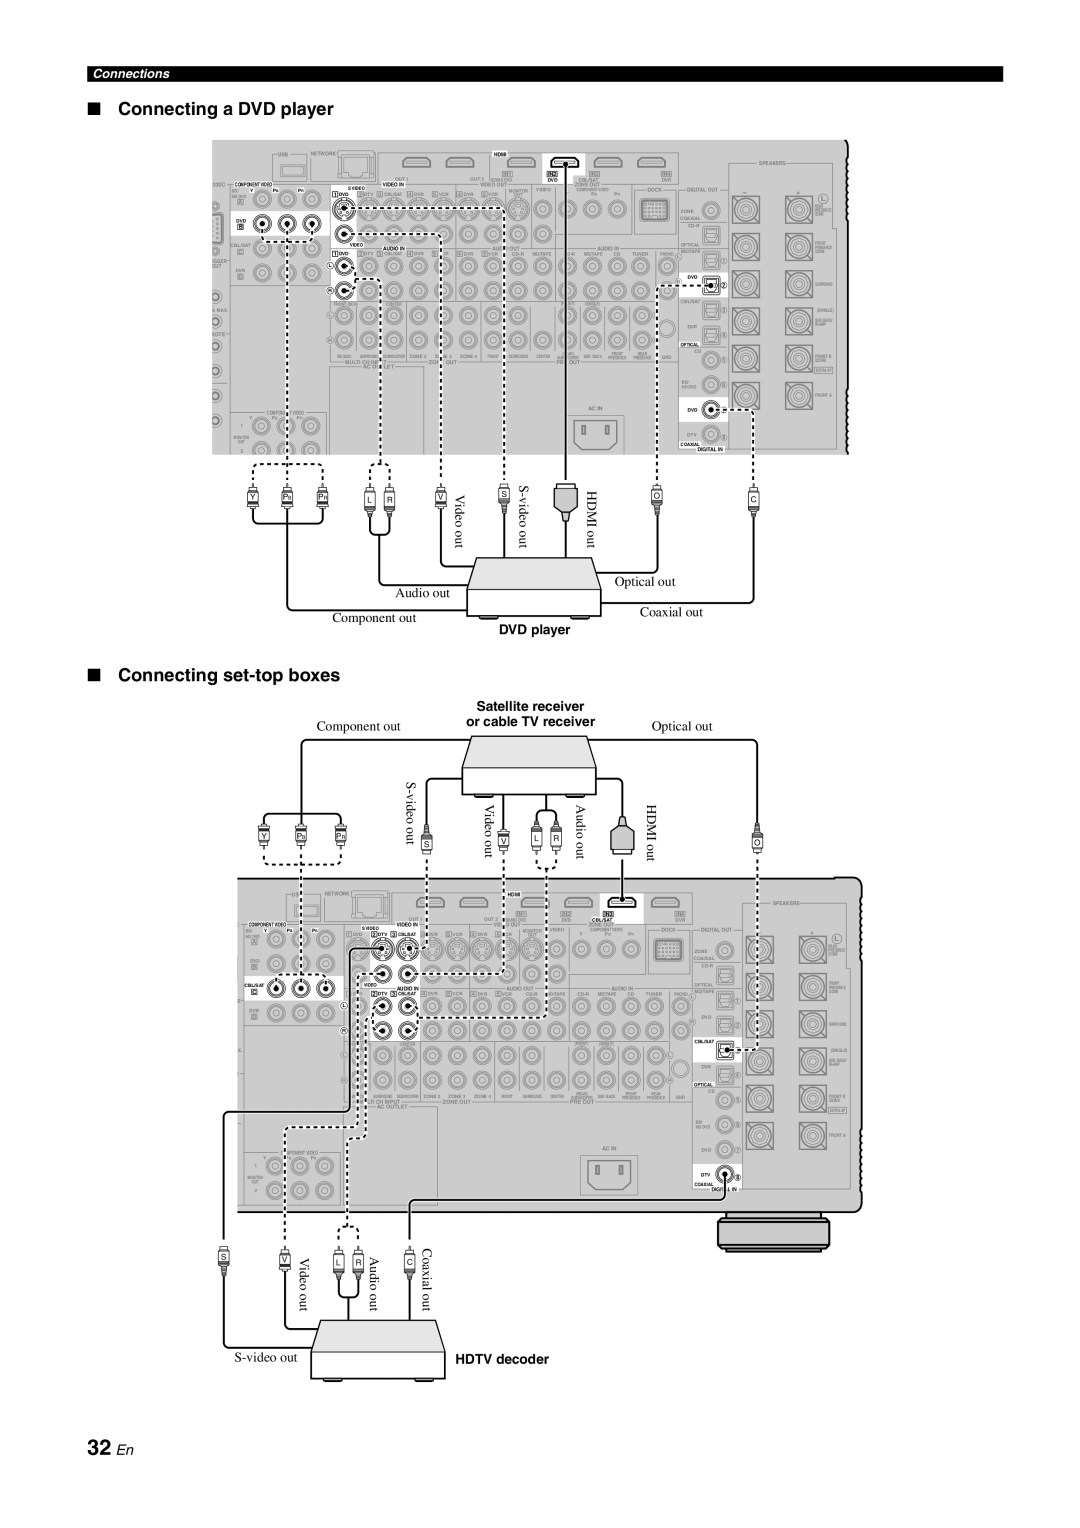 Yamaha DSP-Z11 owner manual 32 En, Connecting a DVD player, Connecting set-topboxes, Connections 